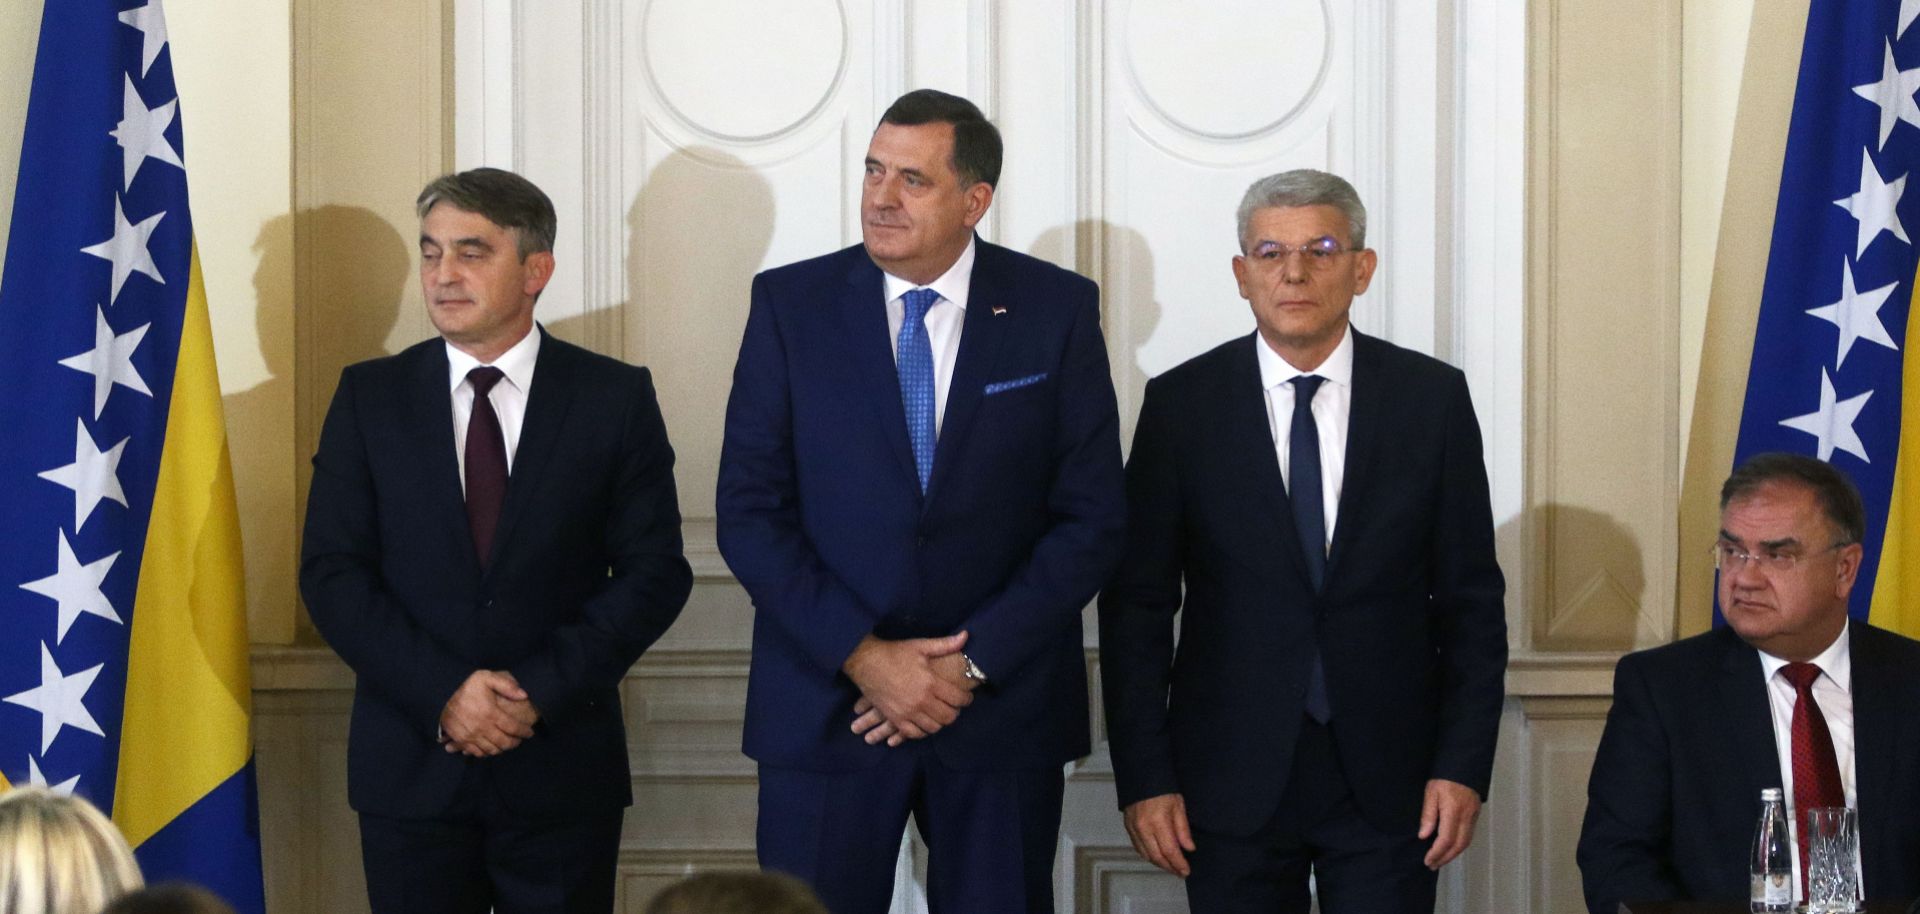 The newly elected members of Bosnia and Herzegovina's tripartite presidency pose together.